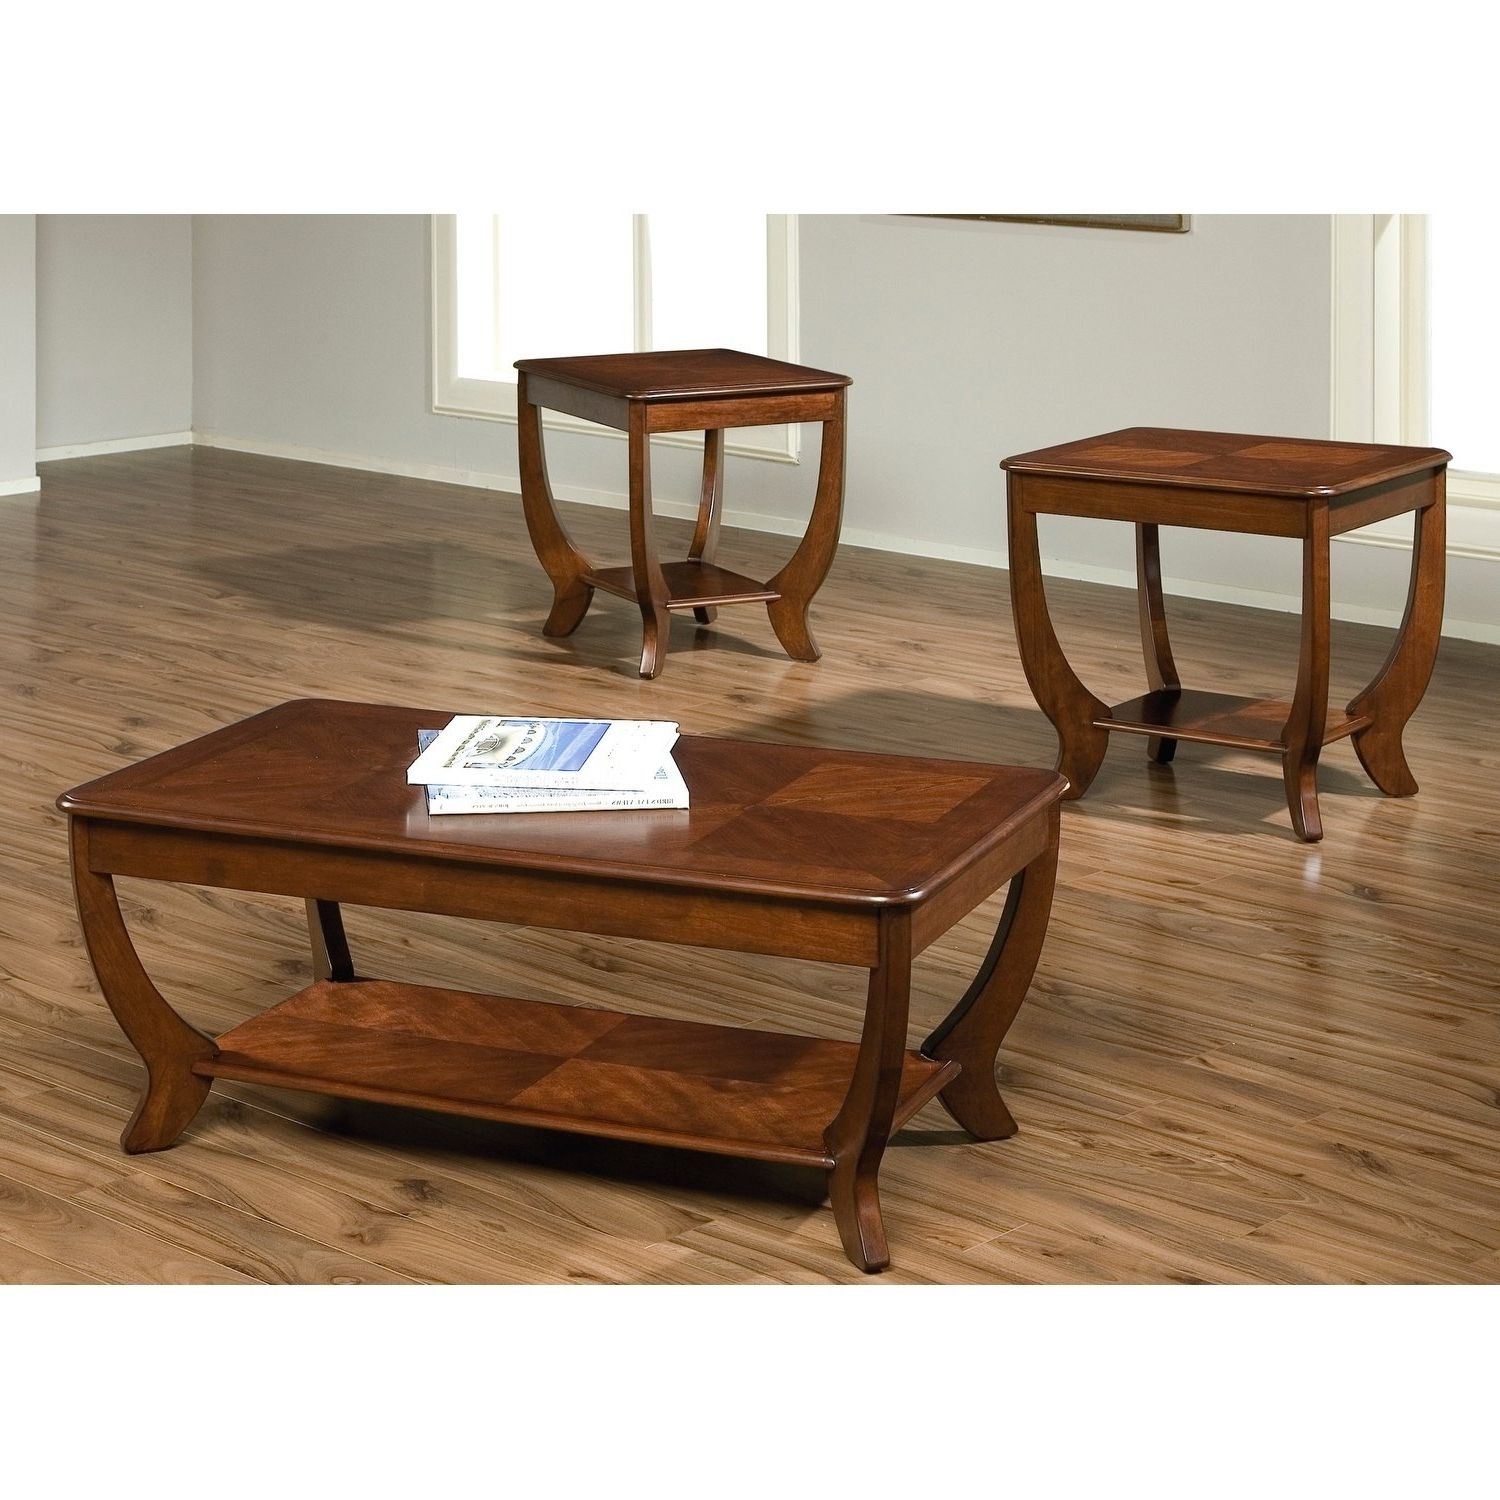 Trendy Shop Cherryville Autumn Blush Occasional Tables (set Of 3) – On Sale Pertaining To Autumn Cocktail Tables With Casters (View 9 of 20)